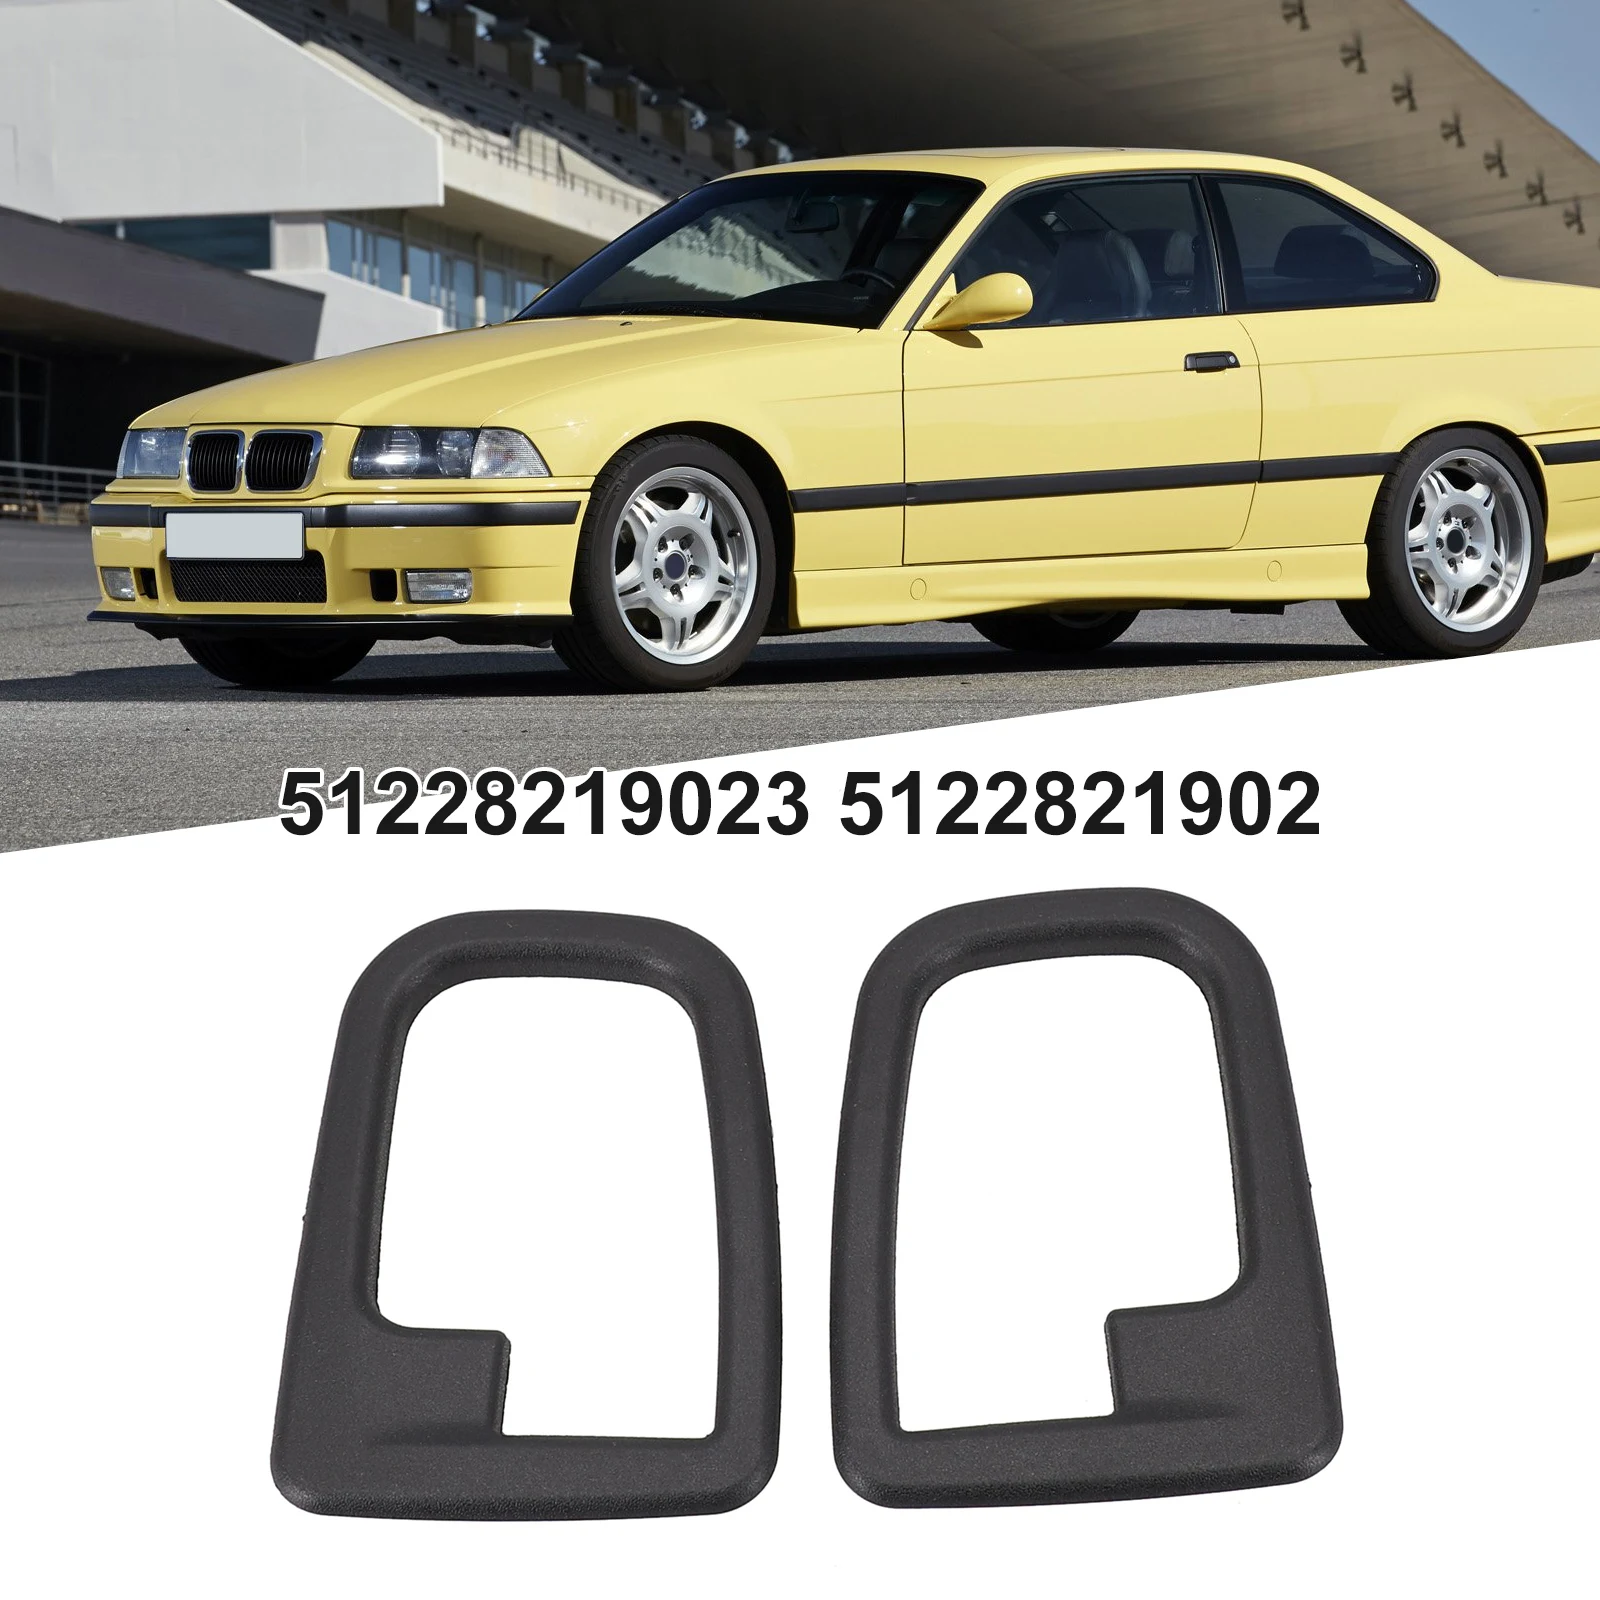 

2pcs Car Interior Door Handle Covers Plug-and-play Frame For BMW 3 Series E36 1992-1999/ Z3 1996-2002 #51228219023/ 51228219024